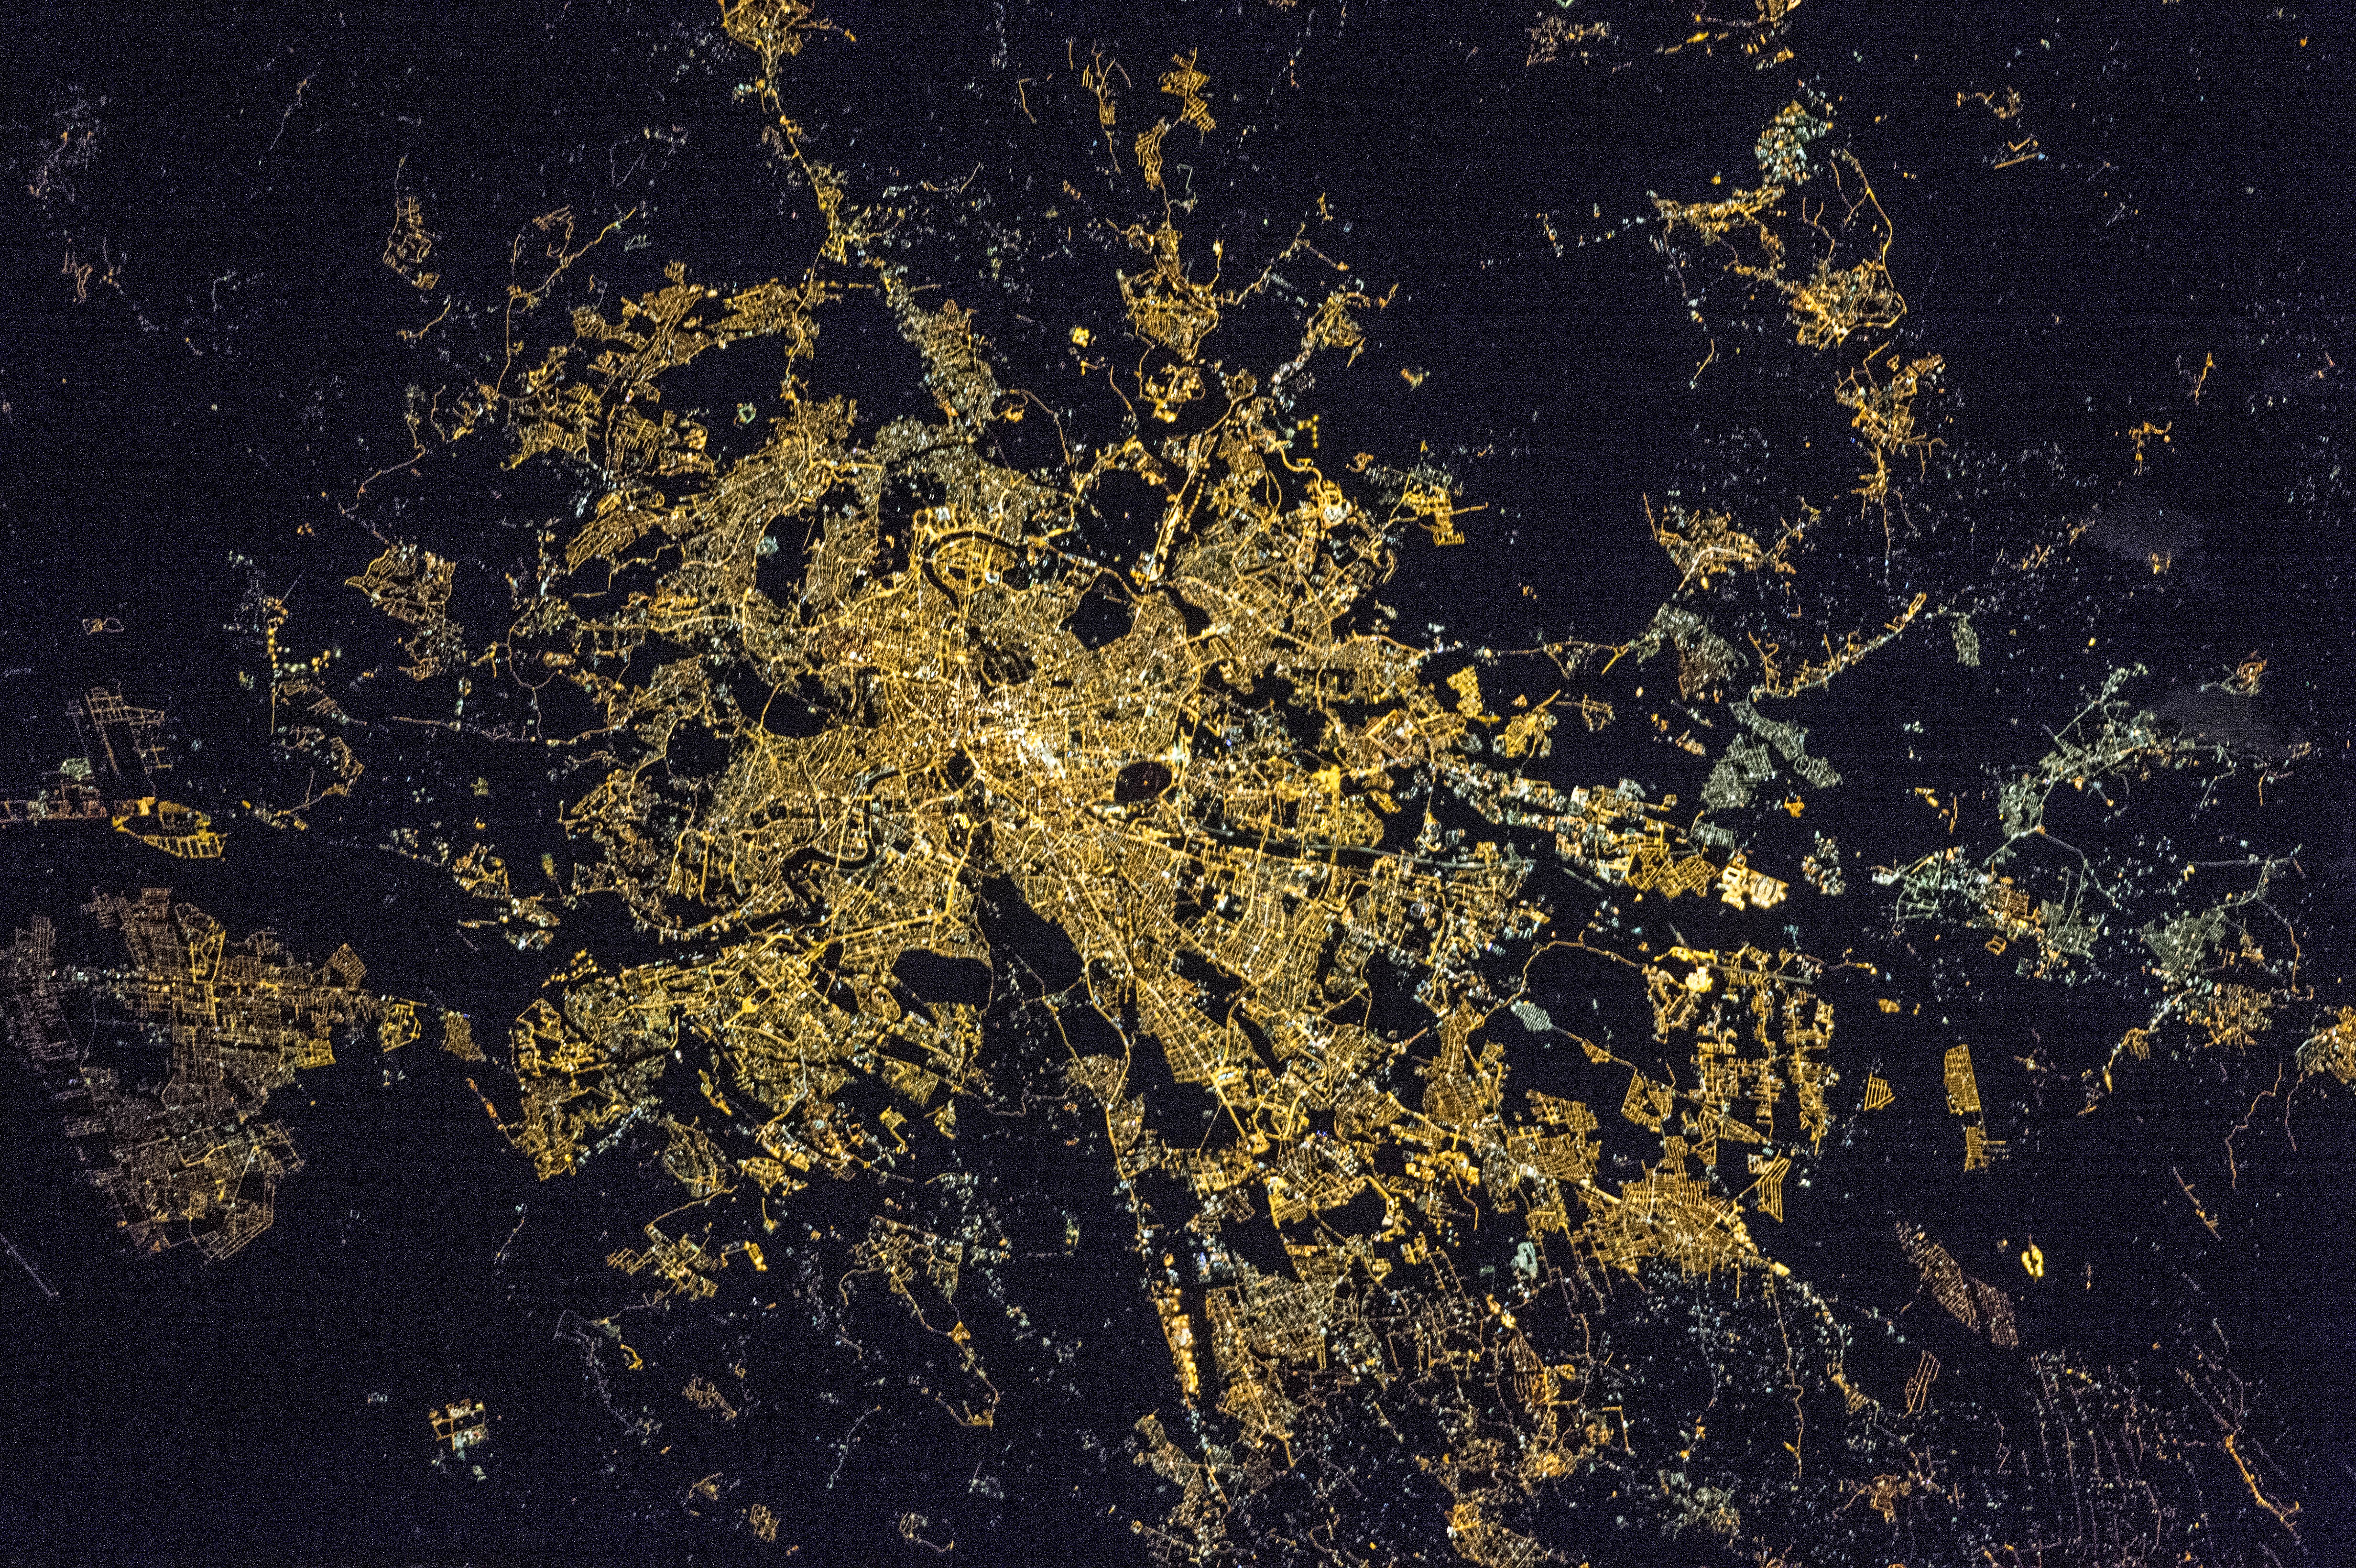 Rome at Night  - related image preview